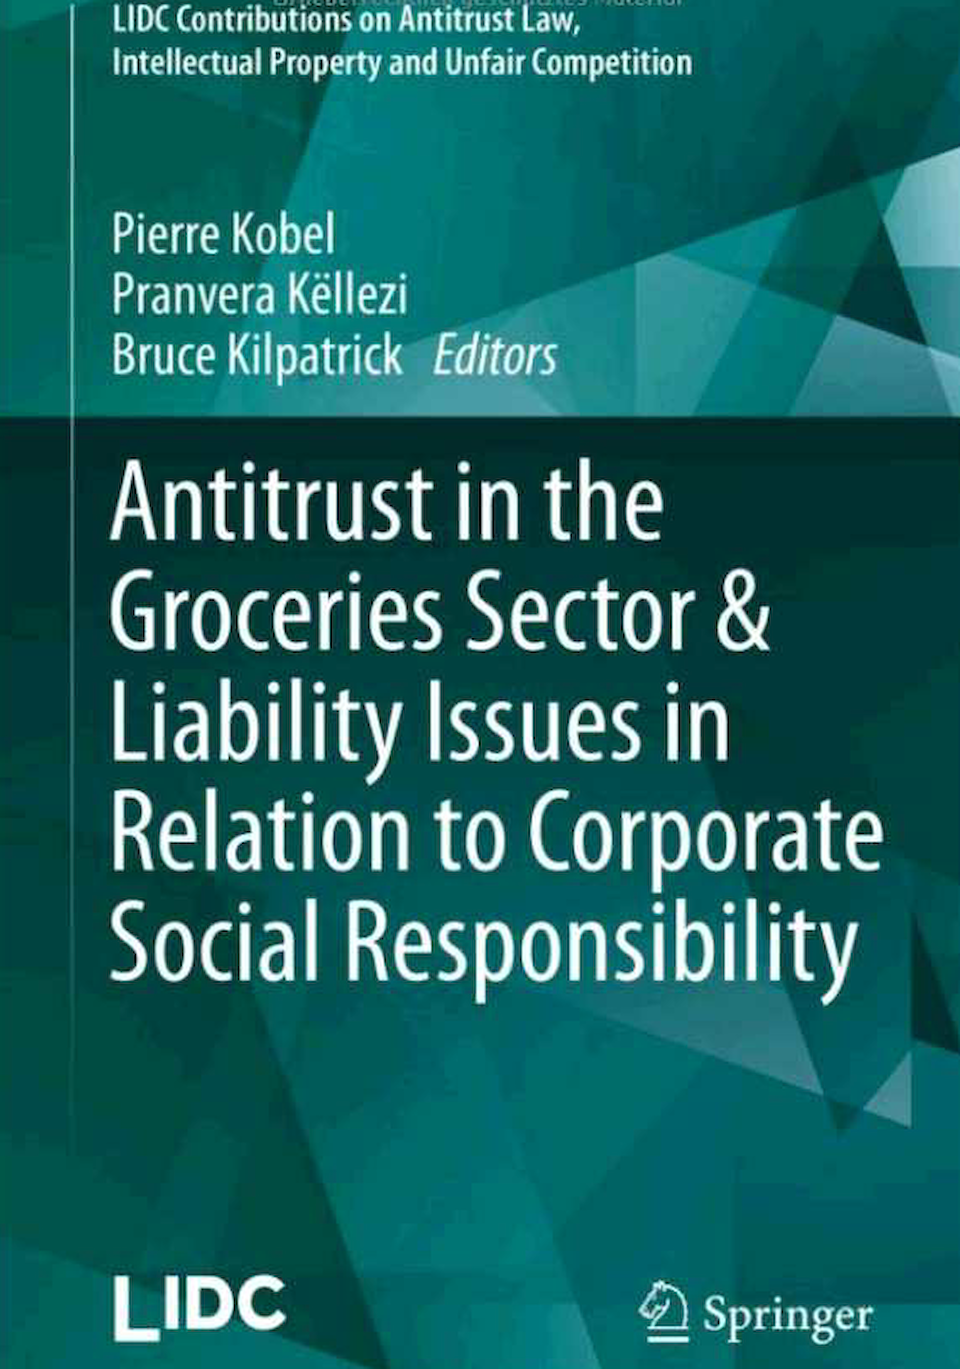 Antitrust in the Groceries Sector & Liability Issues in Relation to Corporate Social Responsibility: Romania